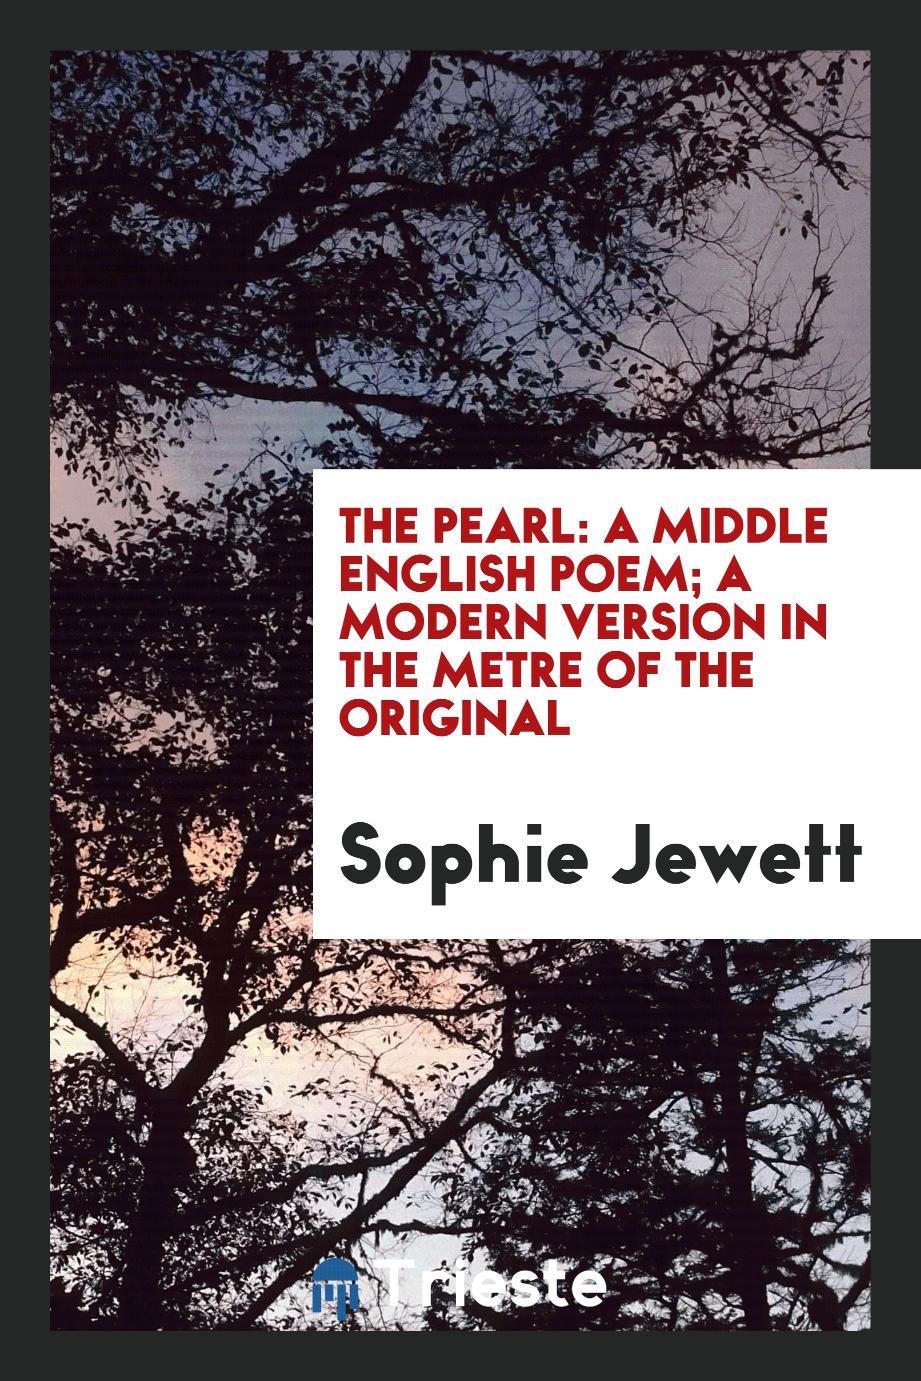 The Pearl: A Middle English Poem; A Modern Version in the Metre of the Original